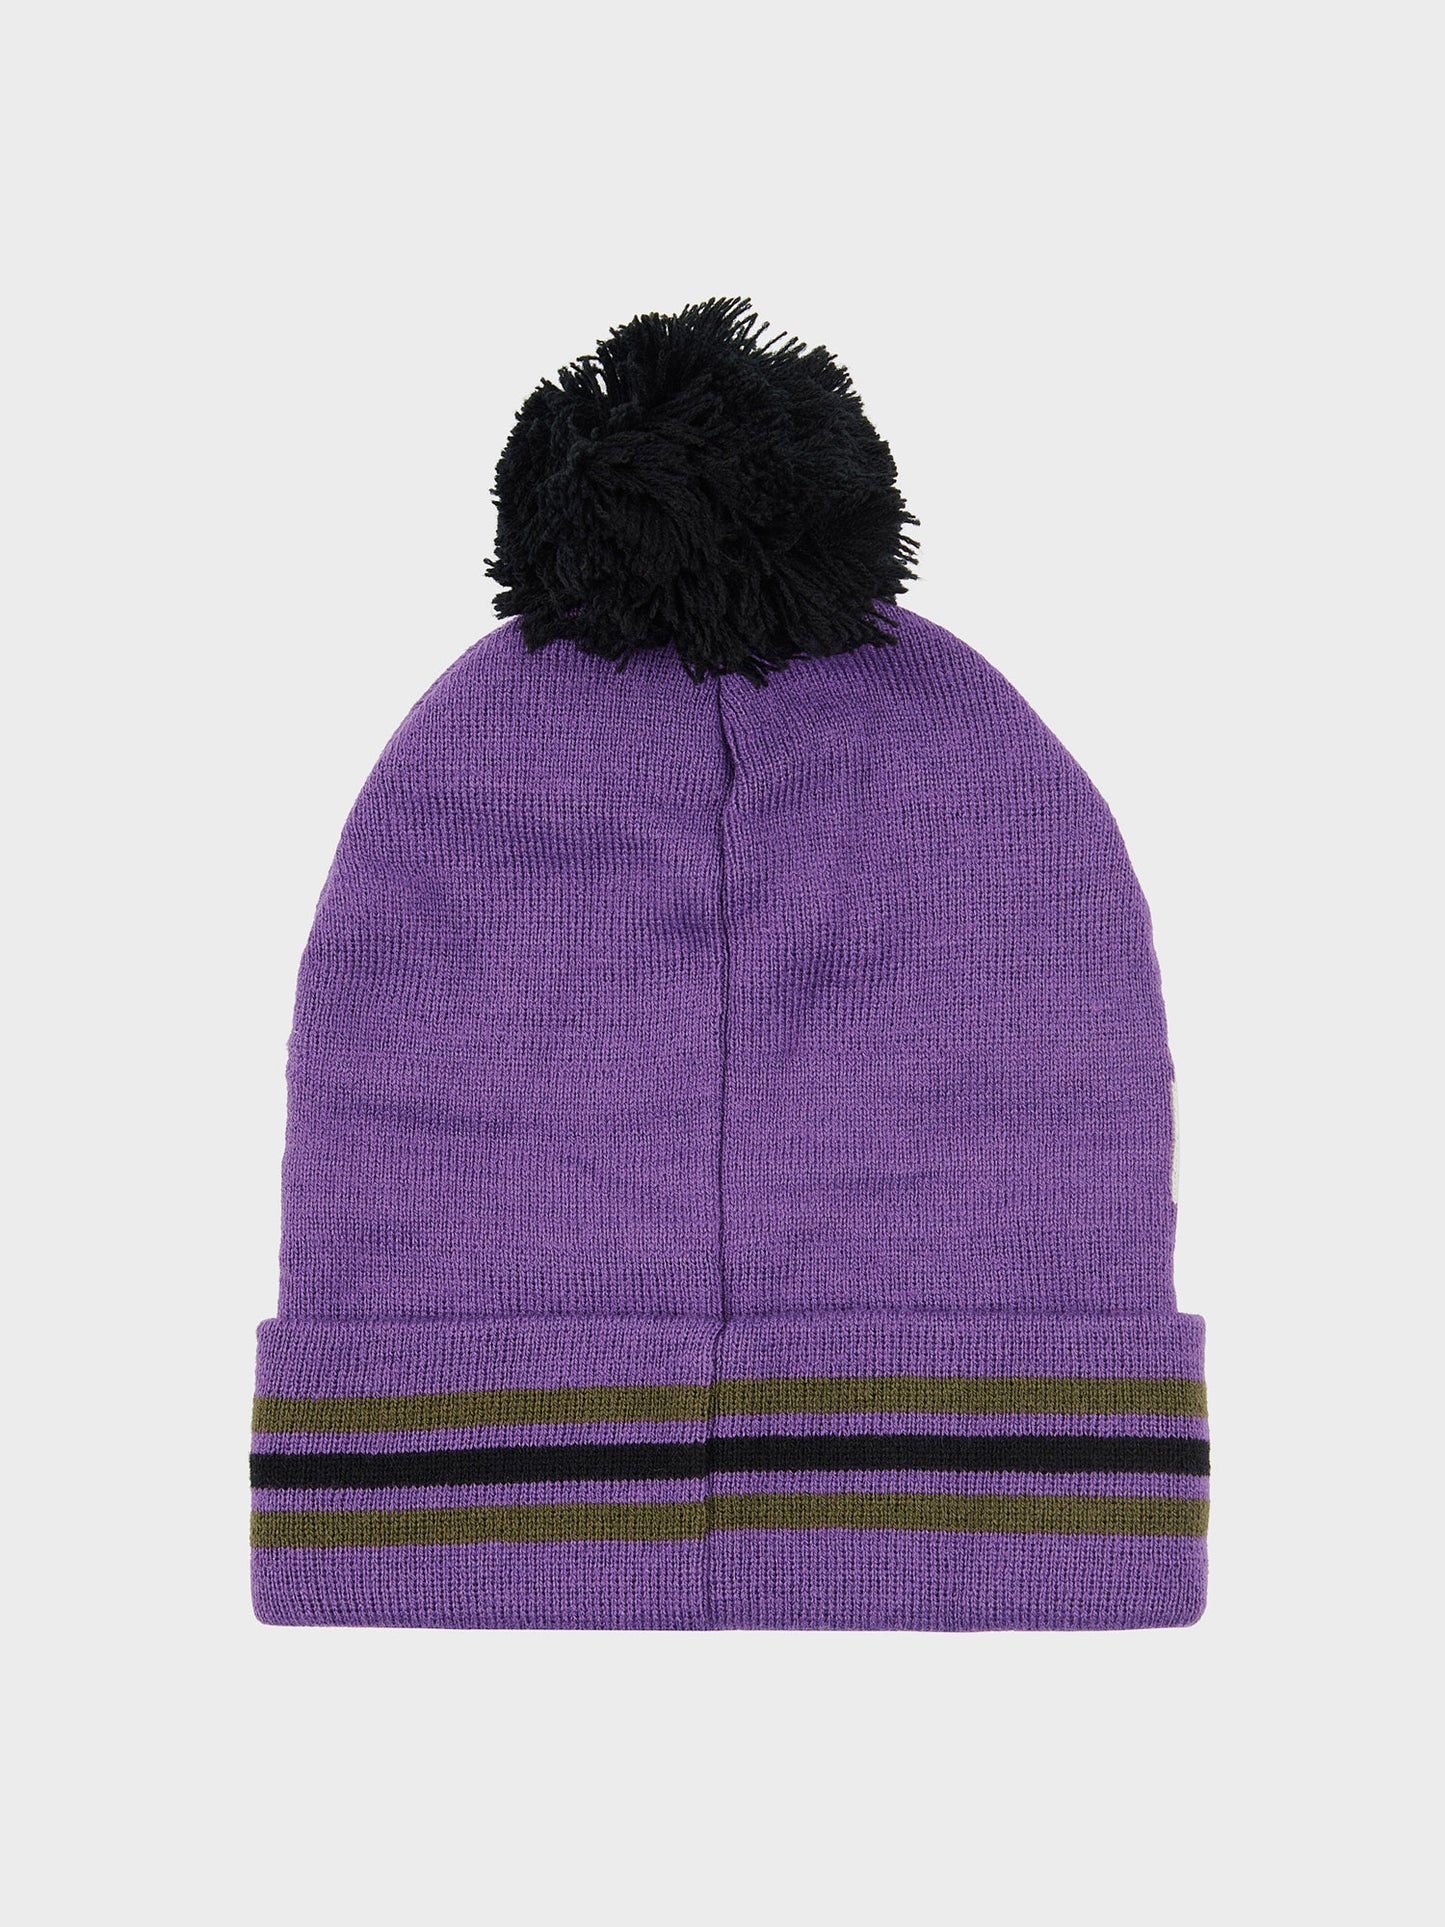 Intarsia Knit Bobble Beanie in Pansy